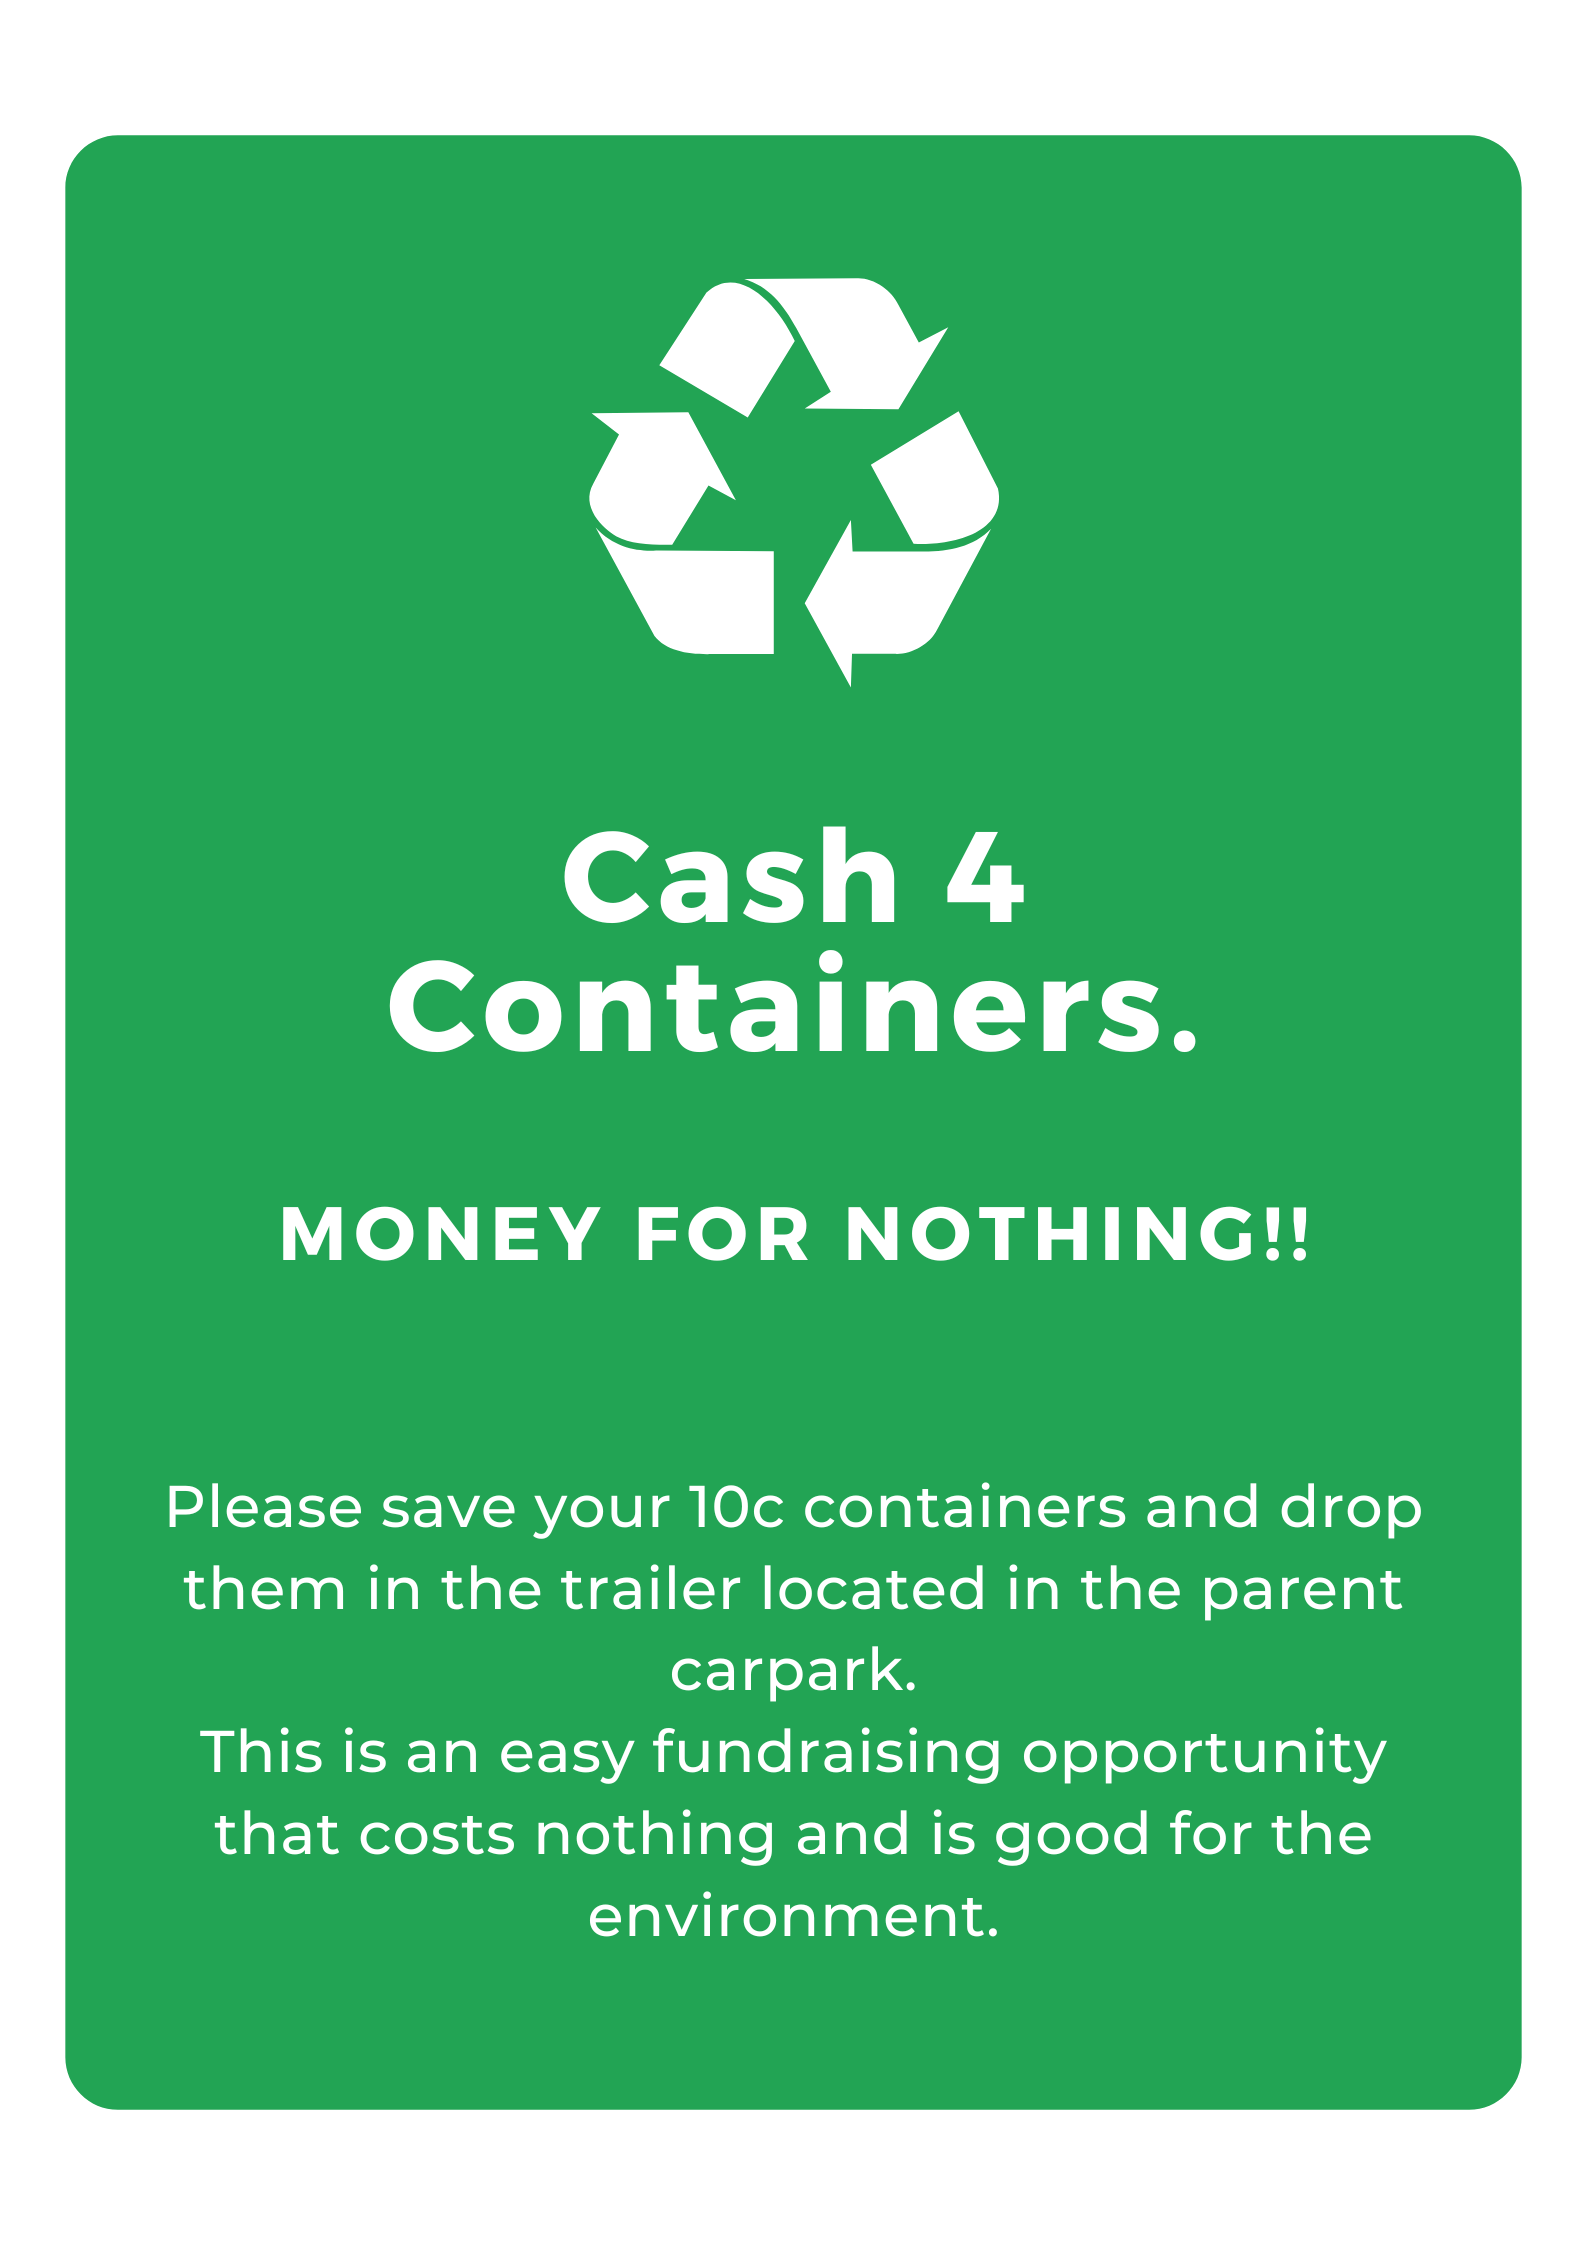 Cash for containers